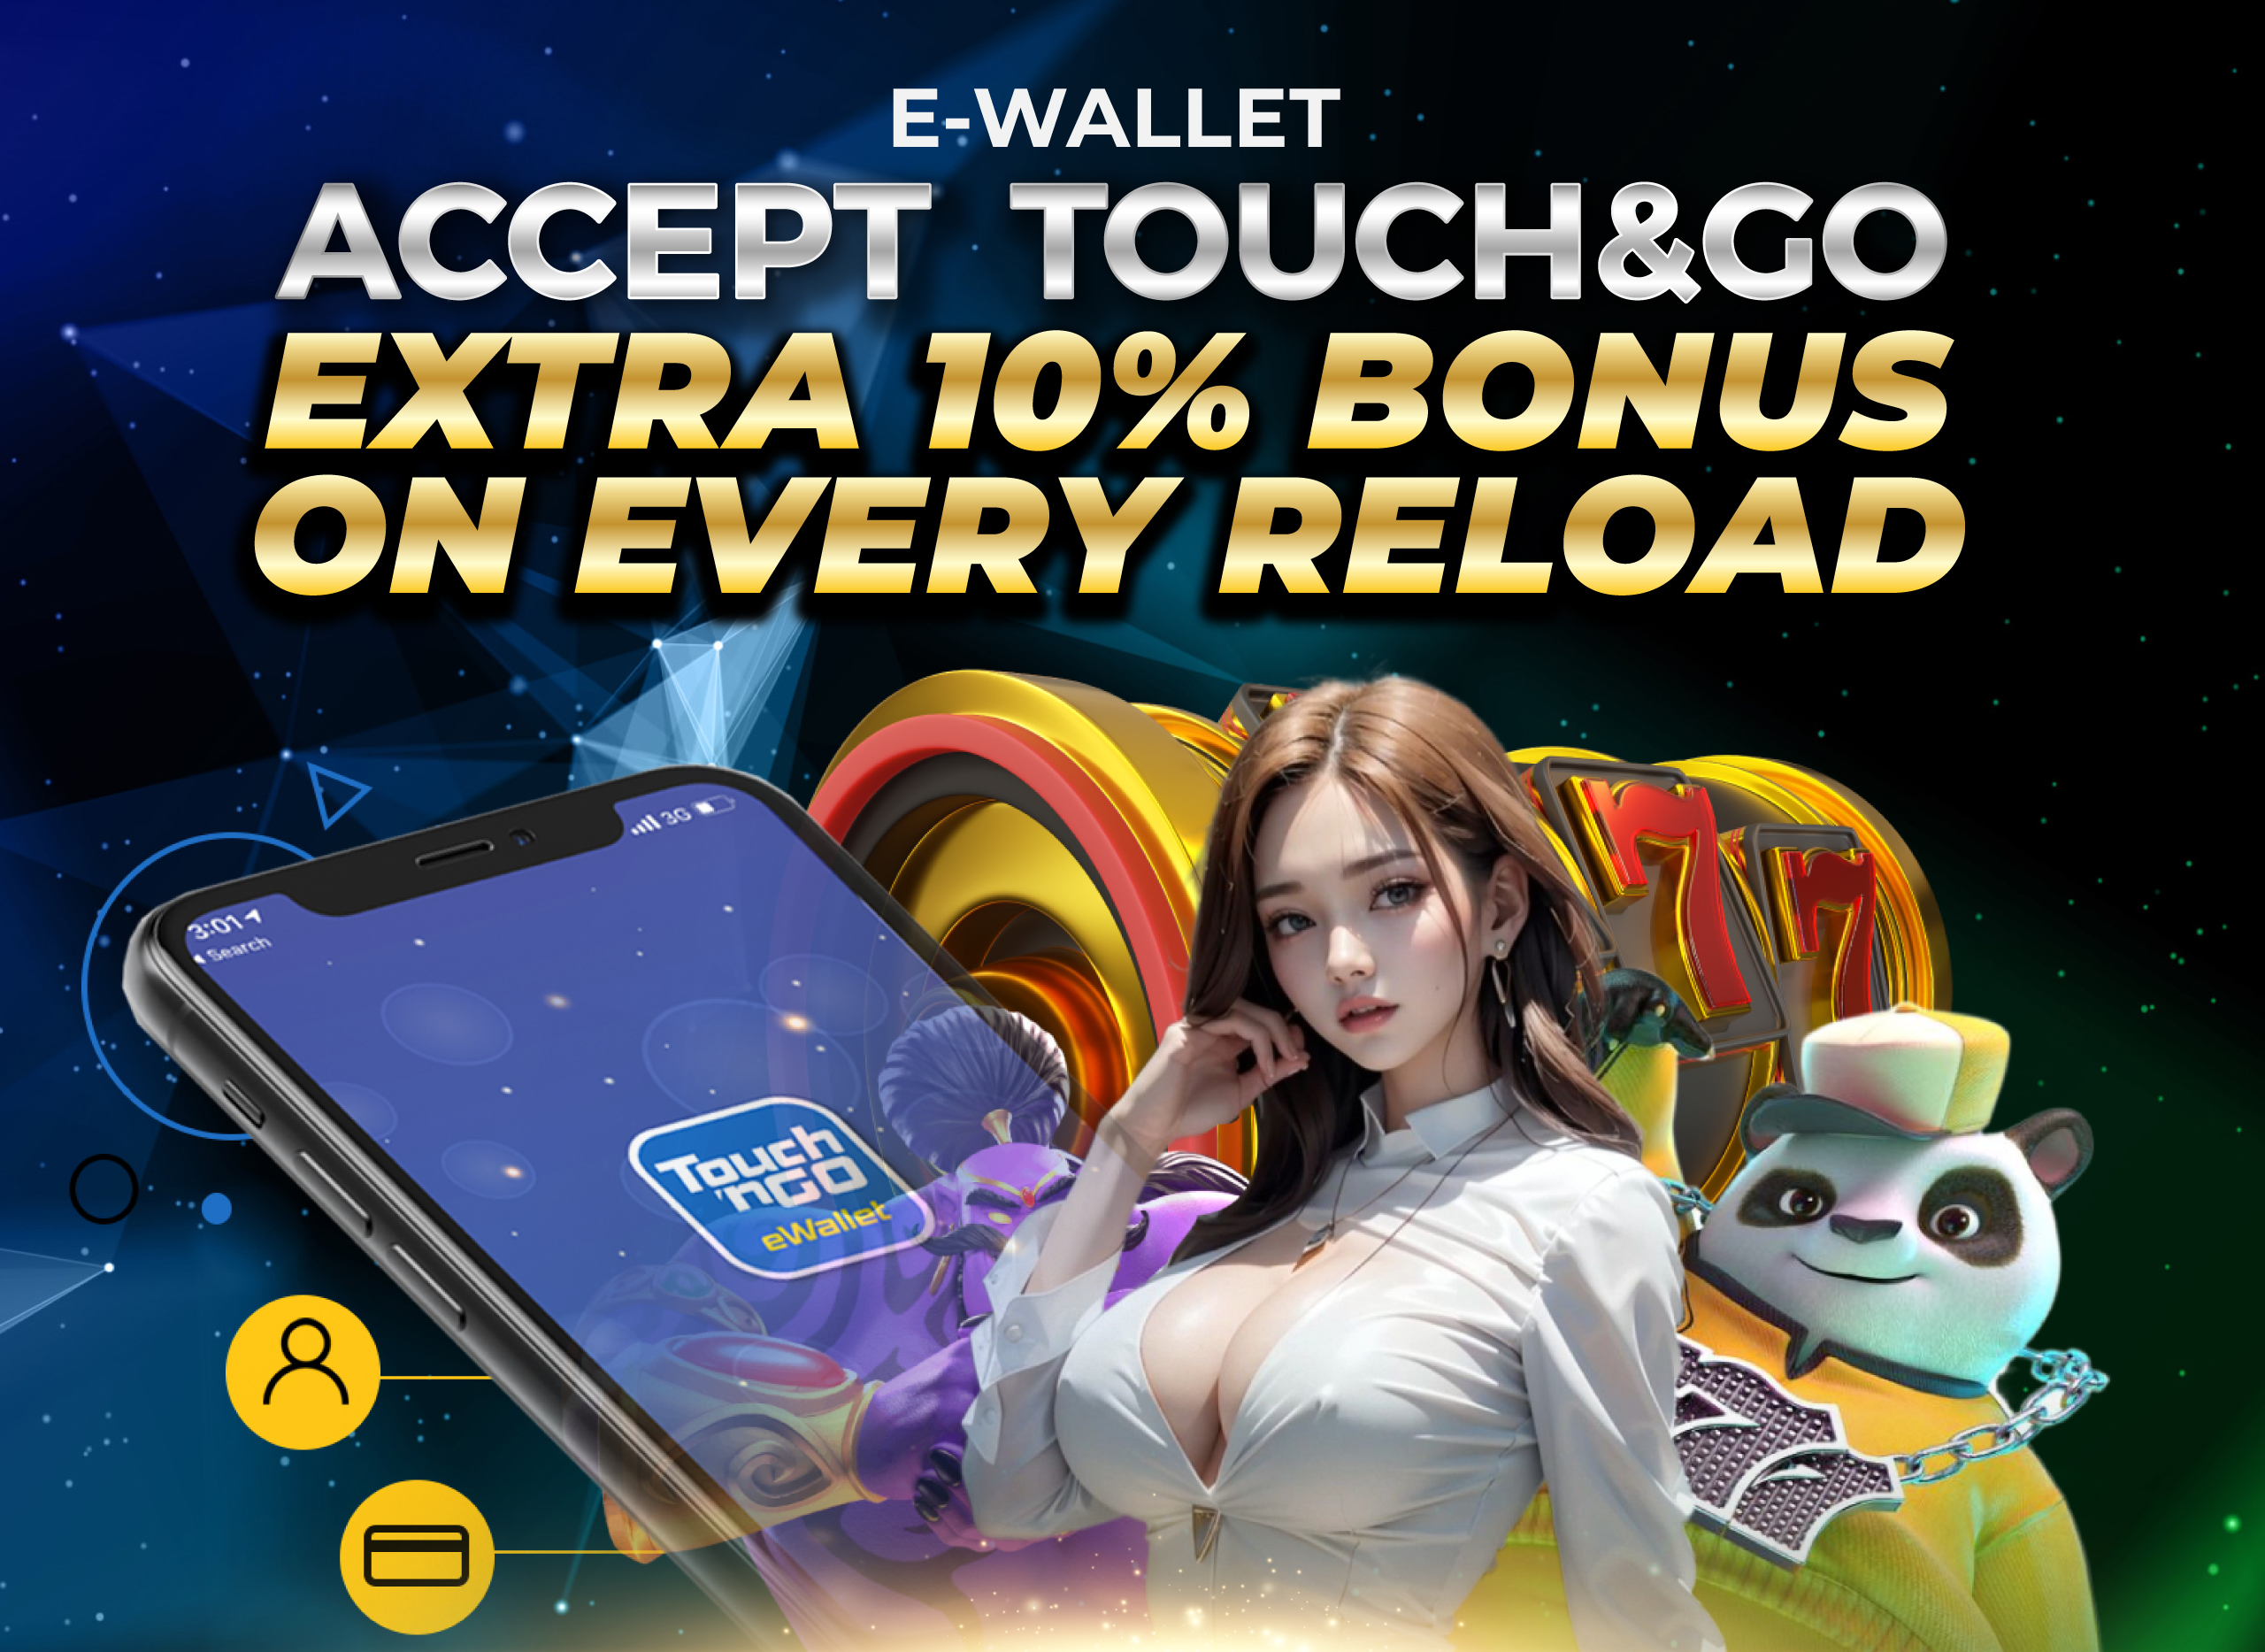 We Accept Touch & Go Reload - Extra 10% Bonus On Every Reload